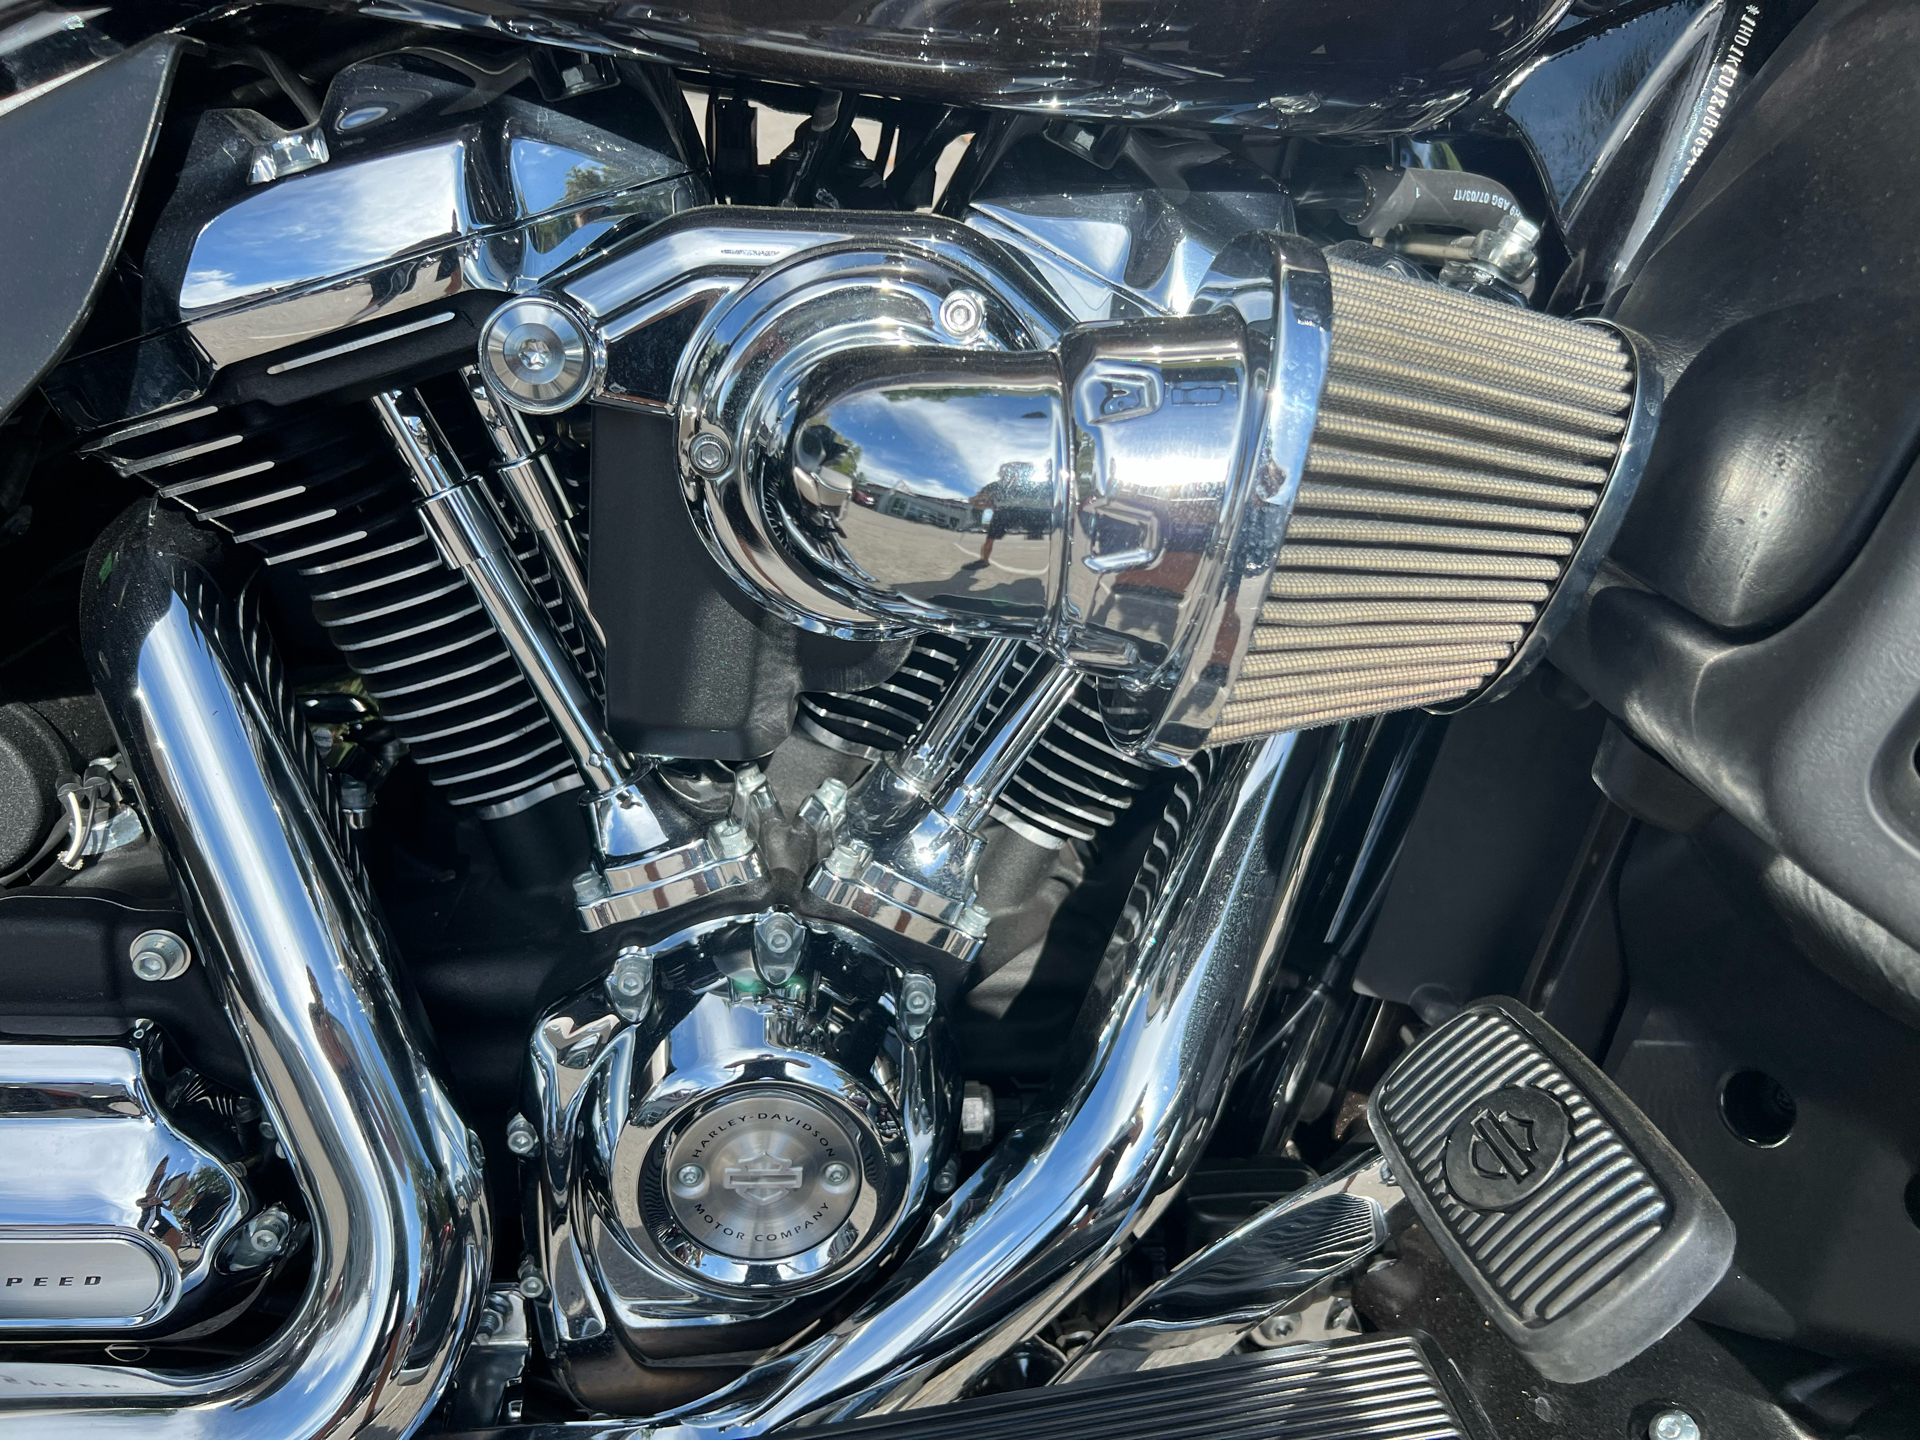 2018 Harley-Davidson Ultra Limited in Franklin, Tennessee - Photo 2